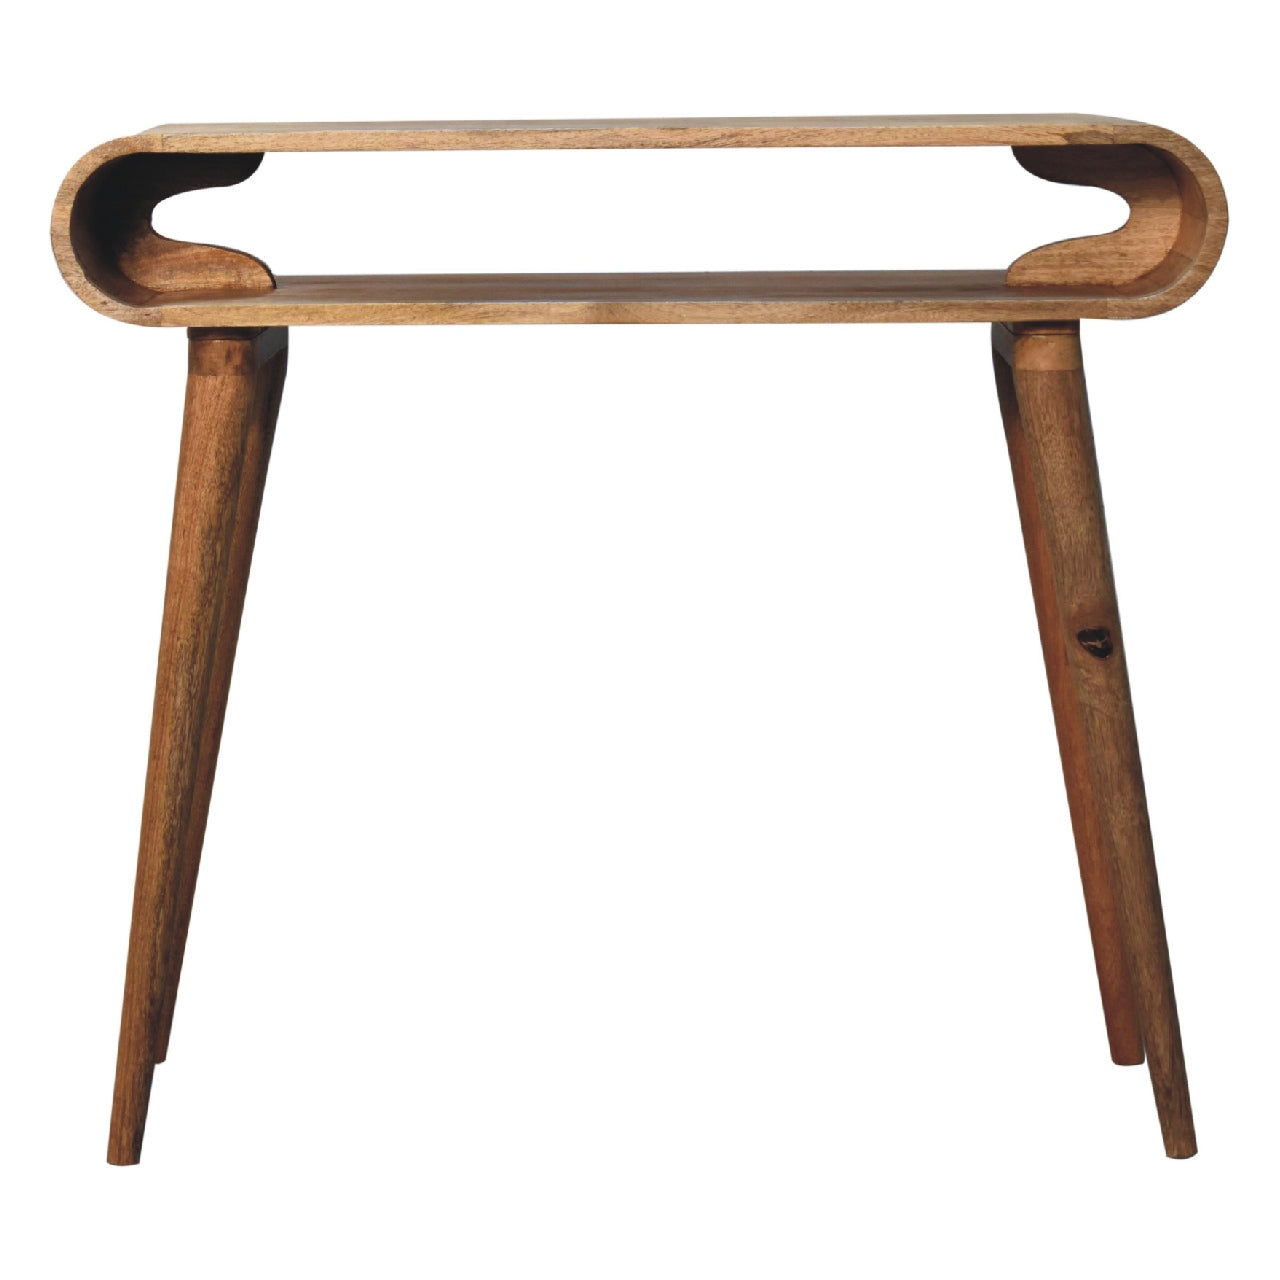 View Amaya Chestnut Nordic Style Console Table information